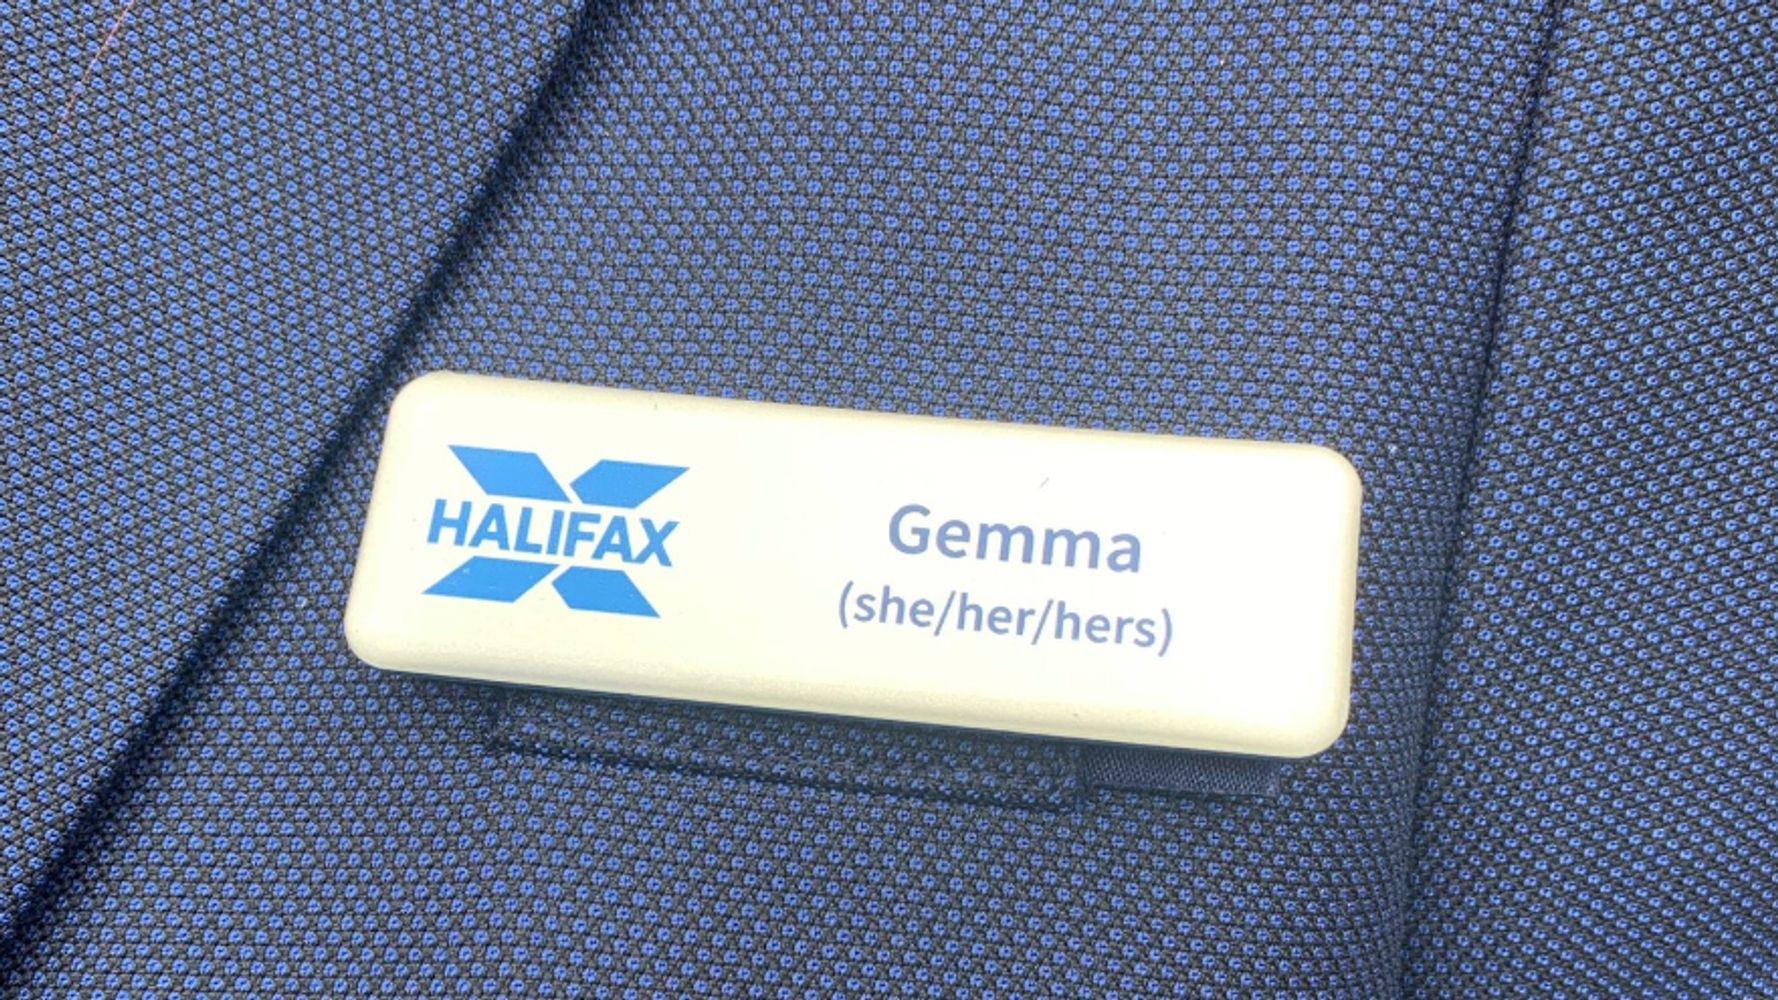 If You happen to be Upset About Halifax’s Pronoun Badges, You Are The Challenge